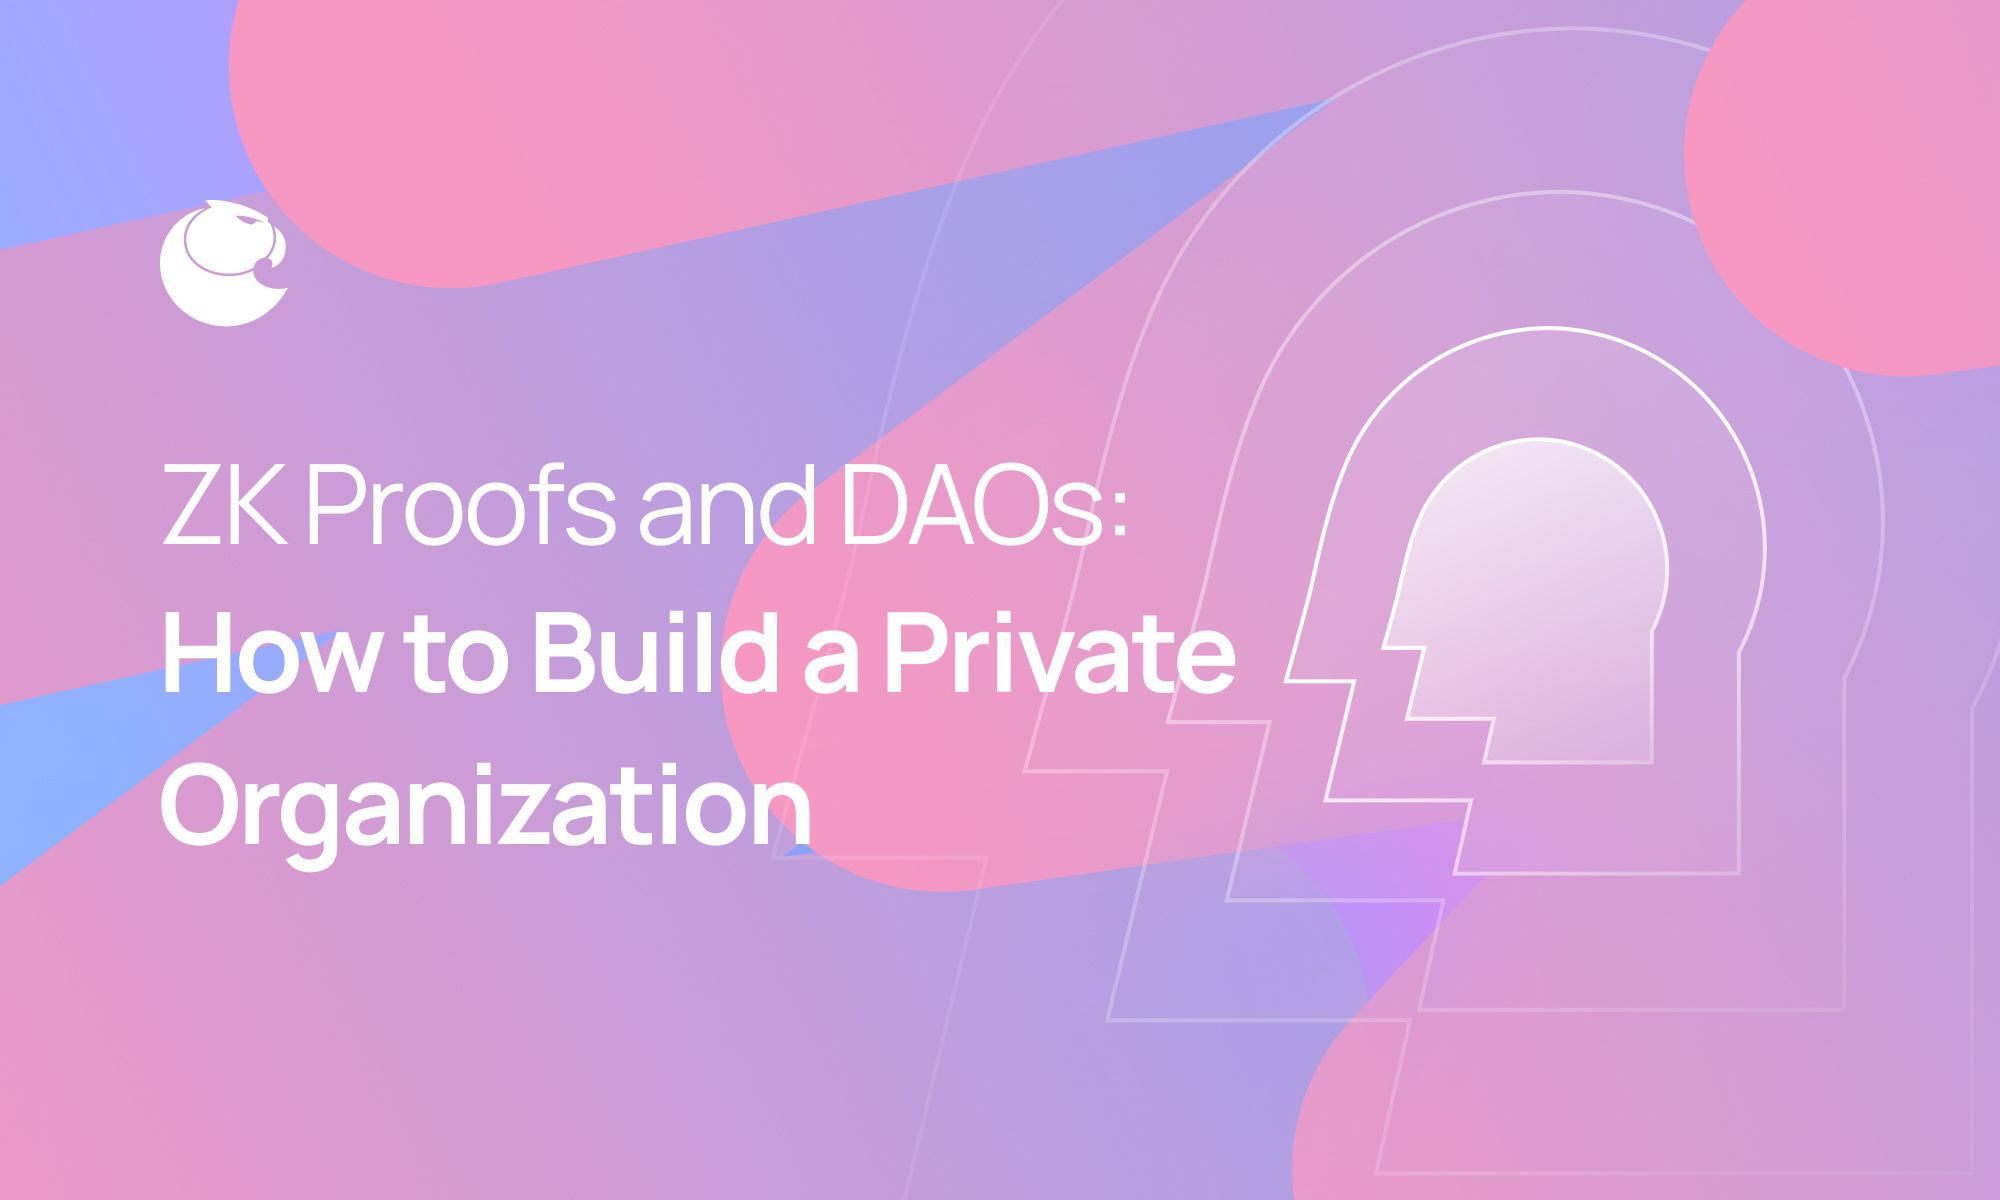 Zero Knowledge Proofs and DAOs: How to Build a Private Organization